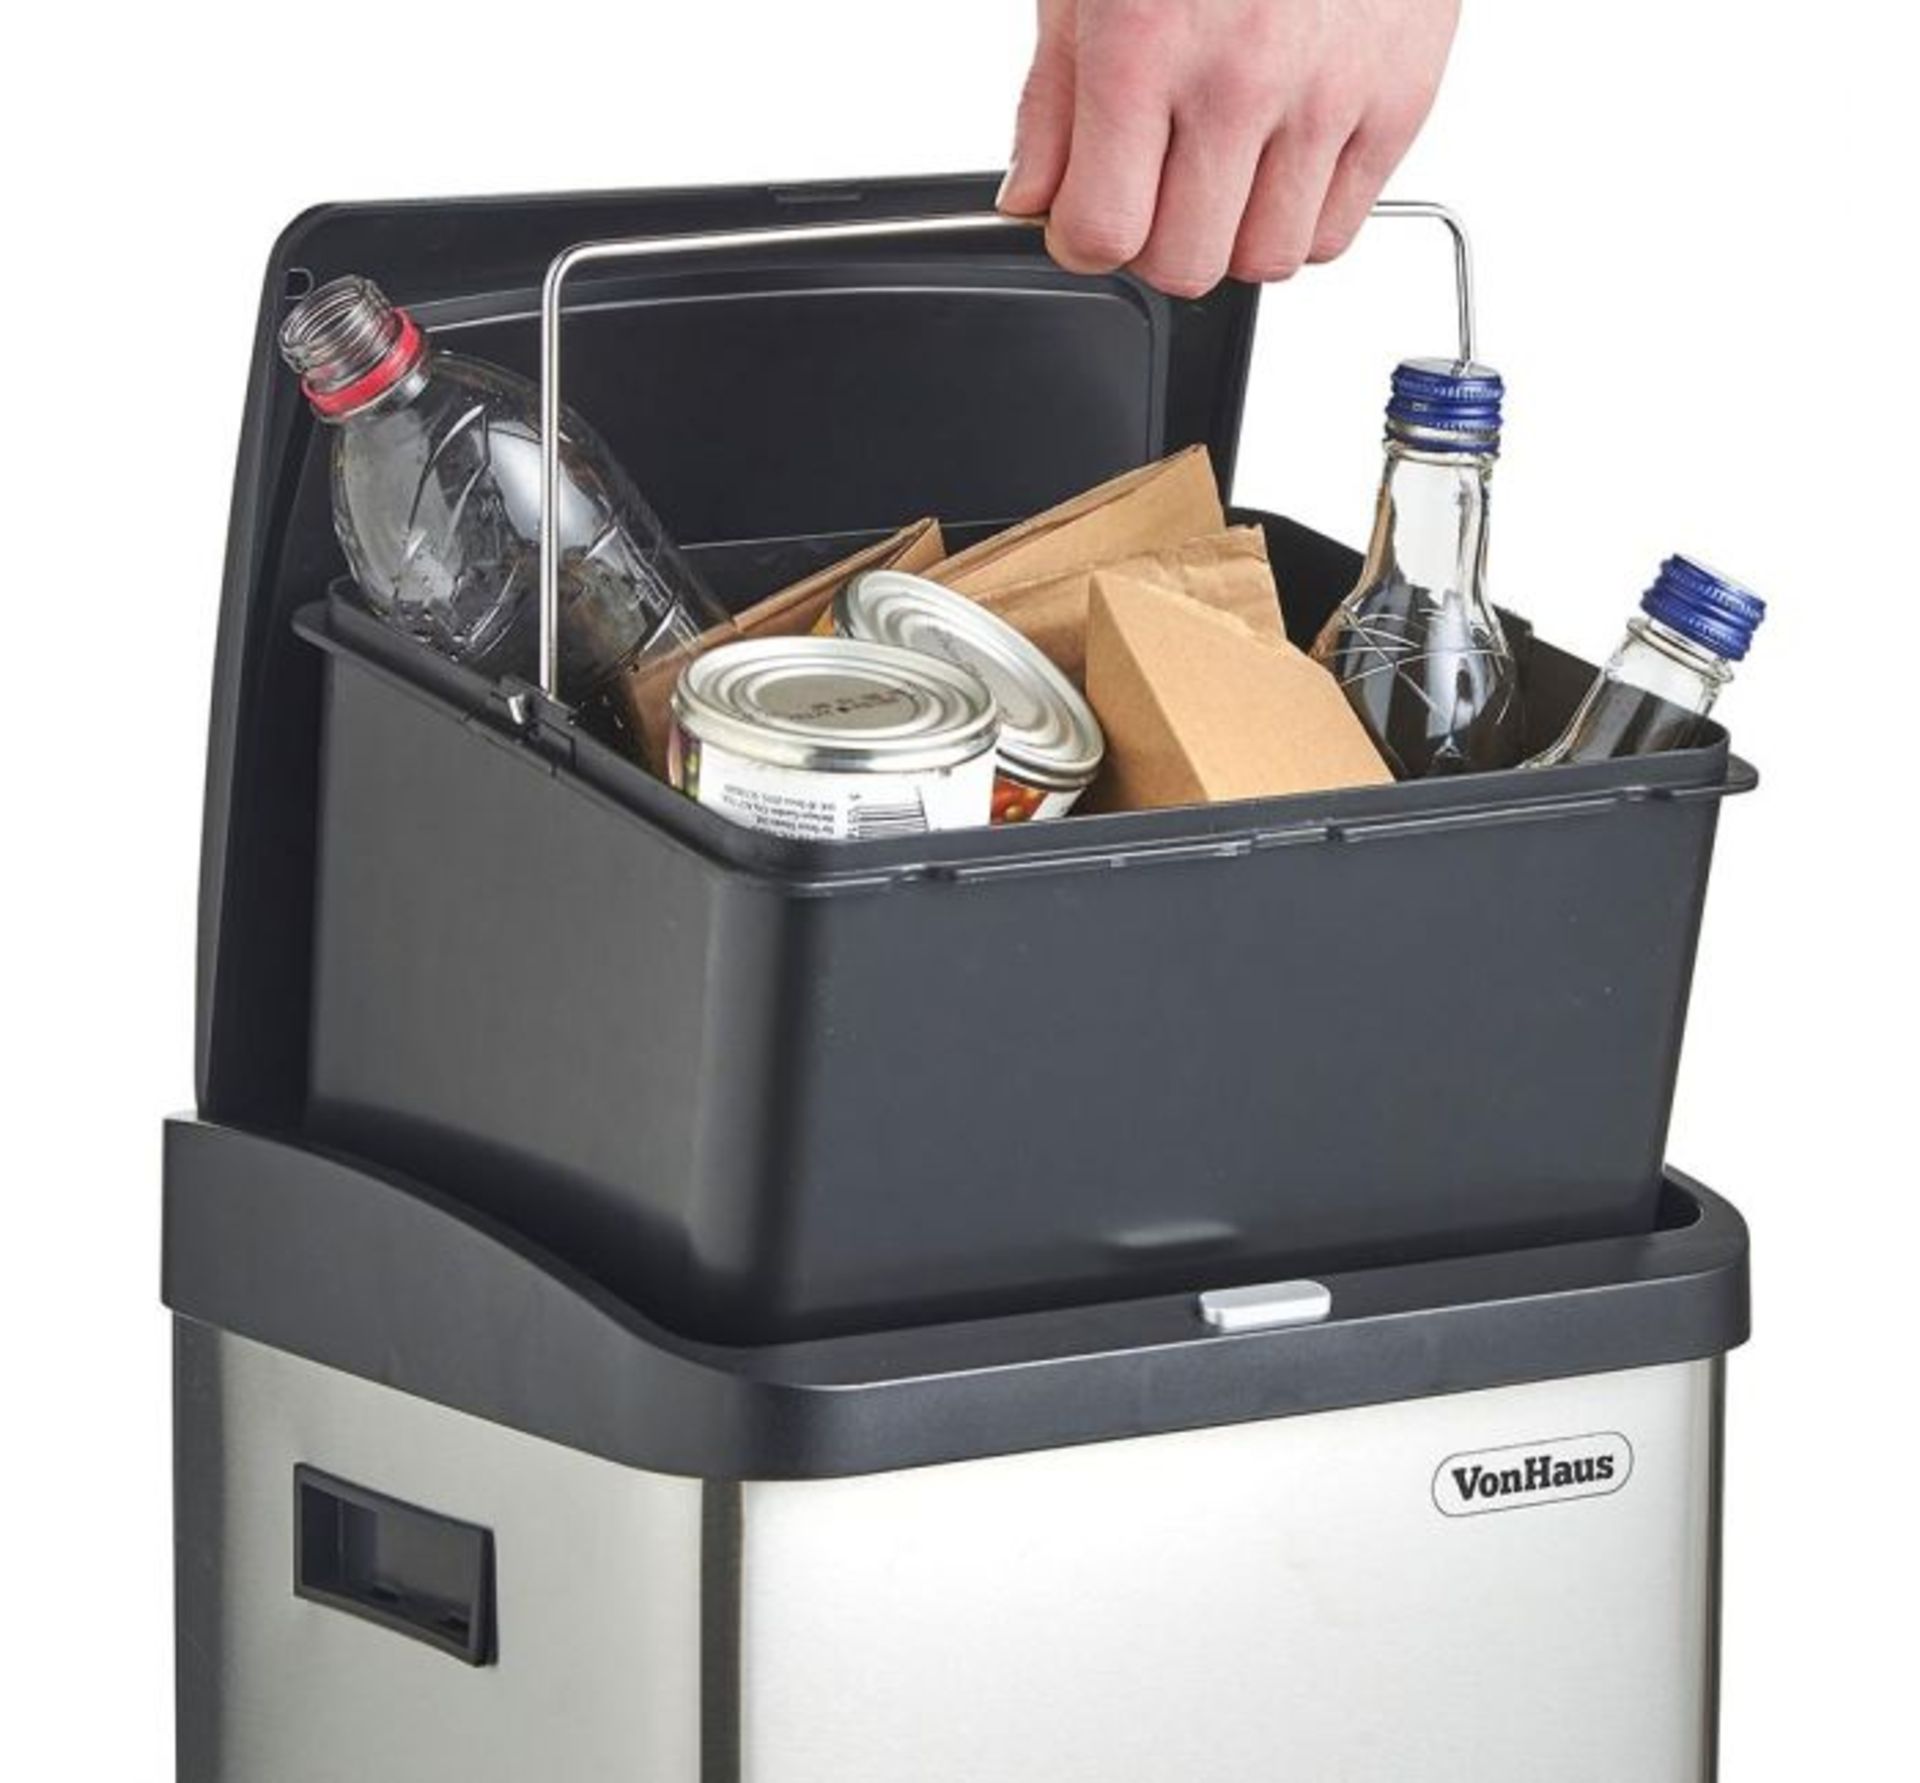 (K33) 34L Stainless Steel Recycle Bin An efficient, space-saving recycling solution. Suitable ... - Image 3 of 3